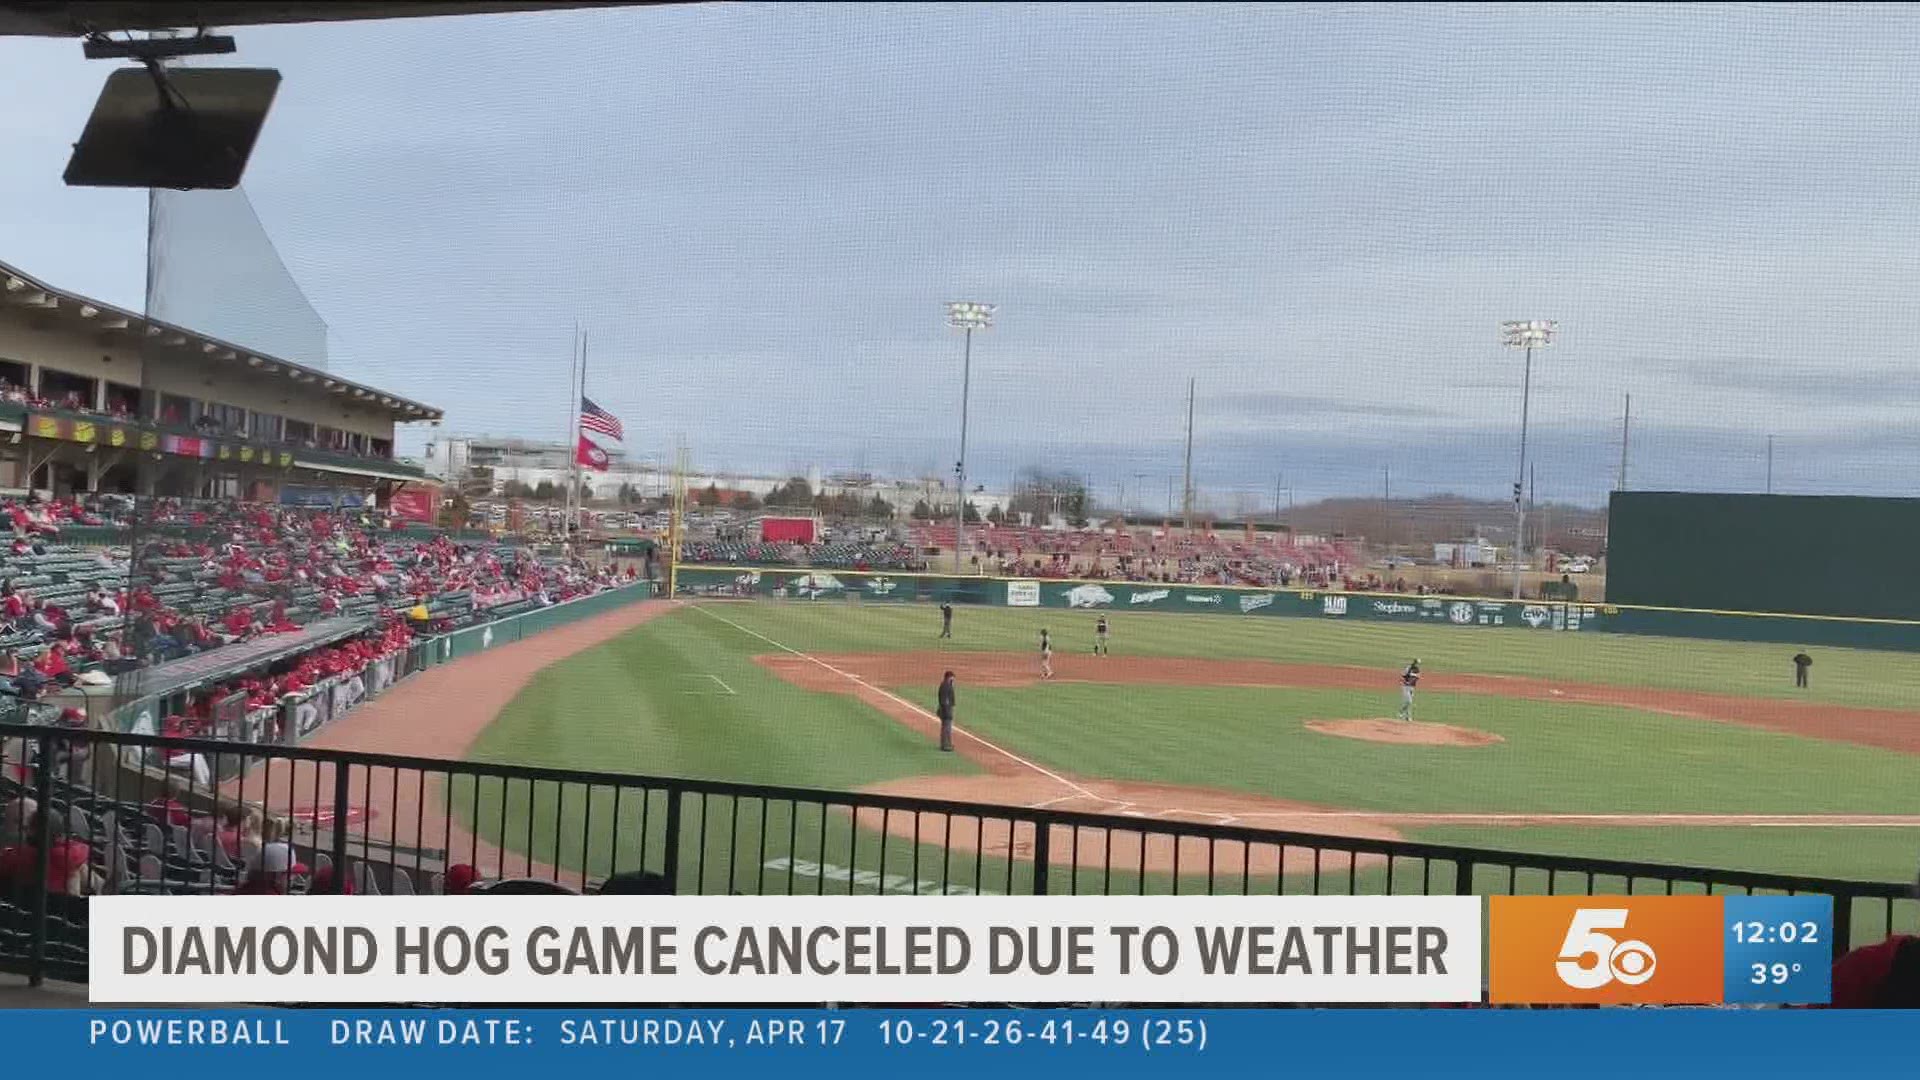 Rain and snow are expected to fall in Northwest Arkansas on Tuesday around game time, which led to the decision to cancel the ballgame.